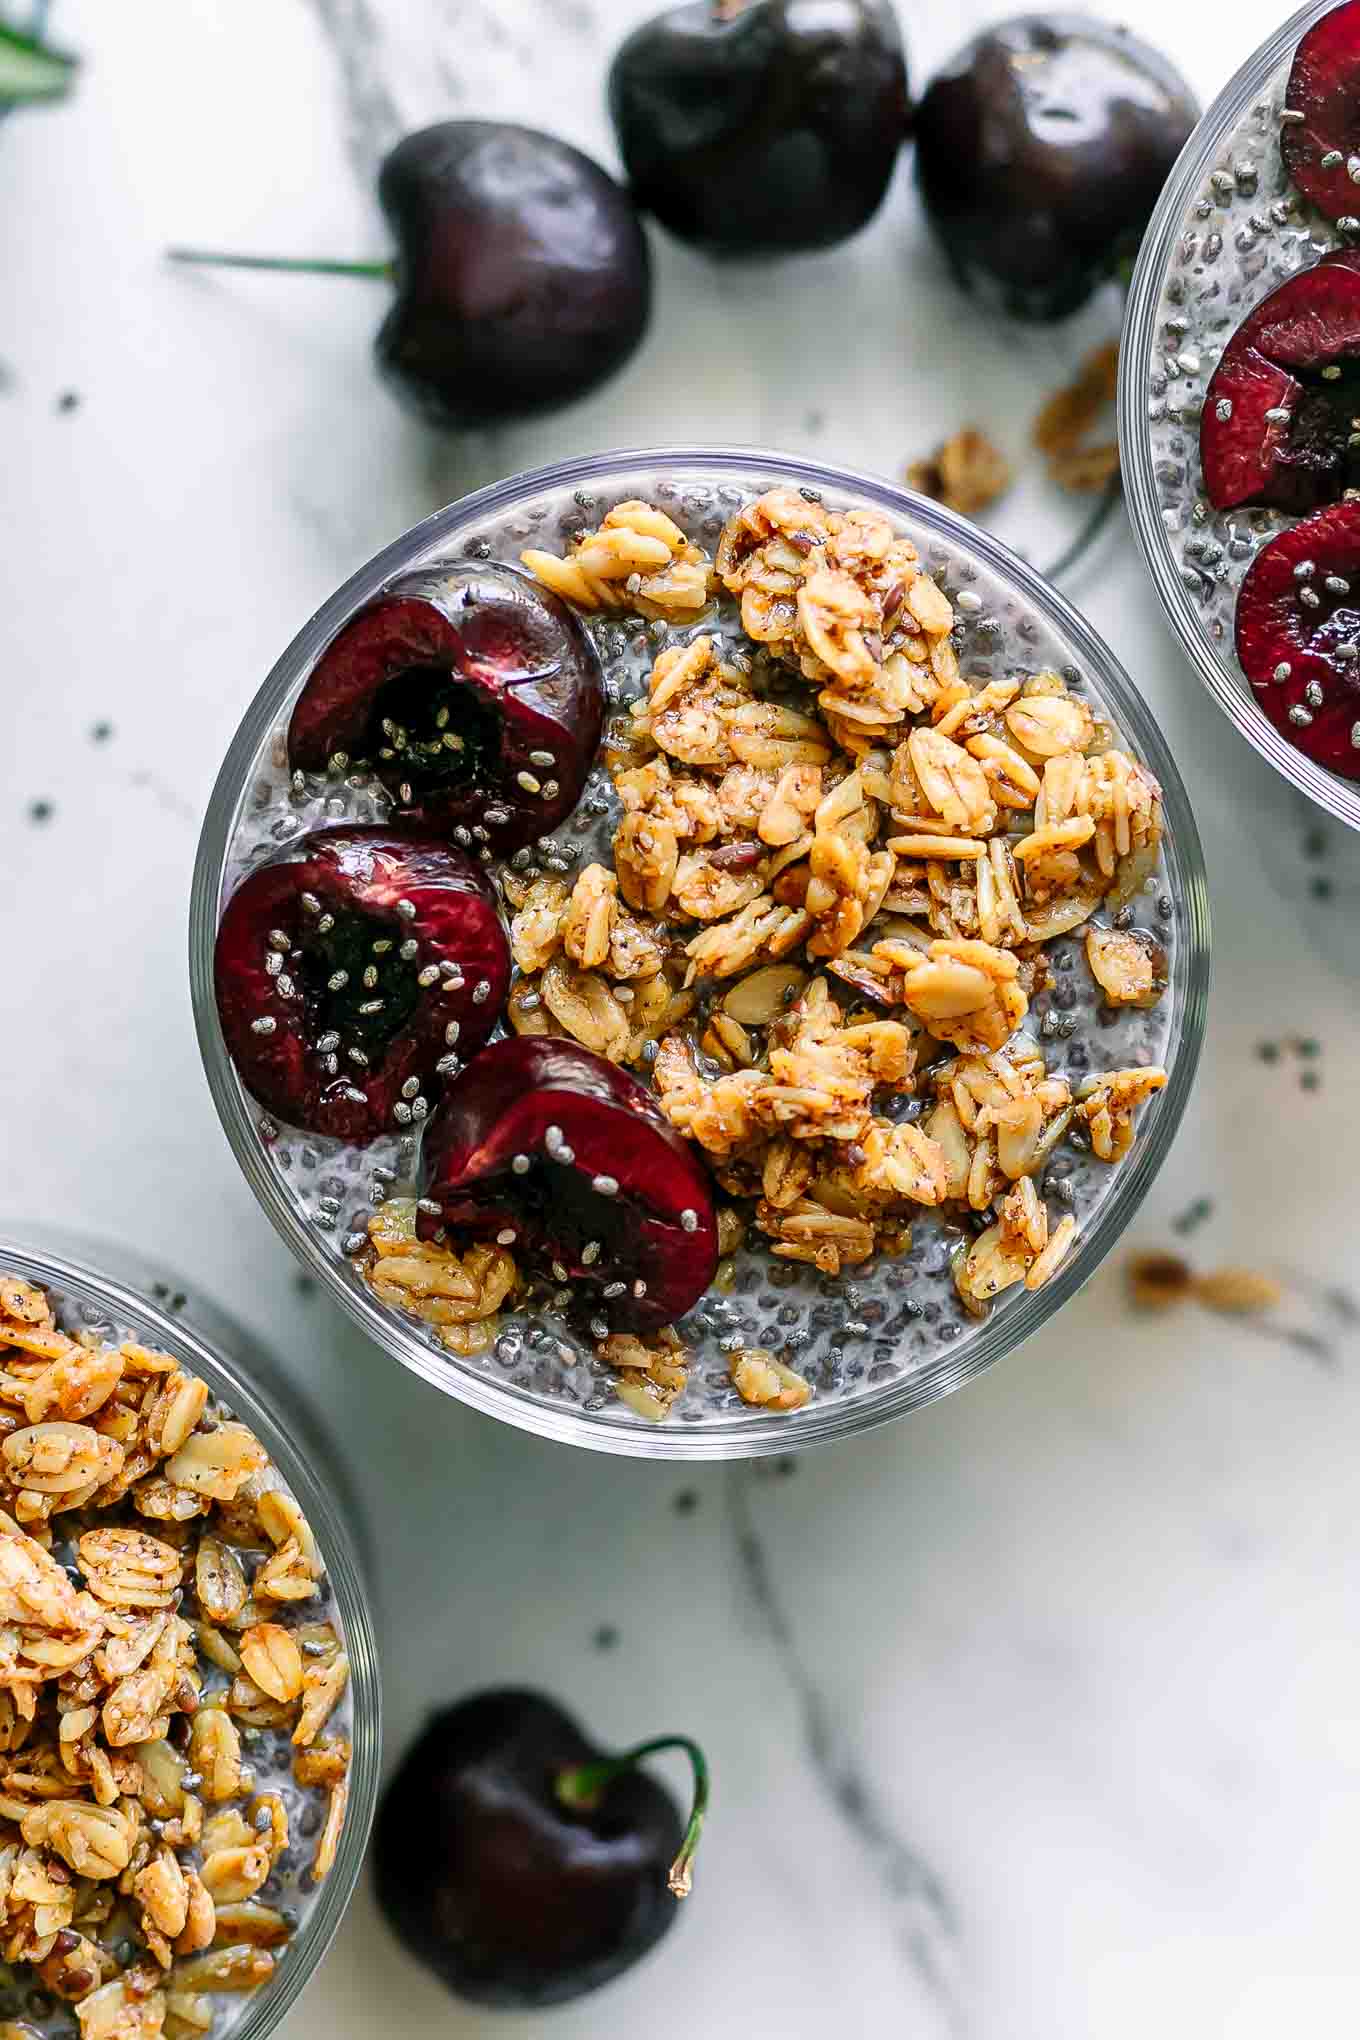 chia seed pudding garnished with granola and cherries on a white table